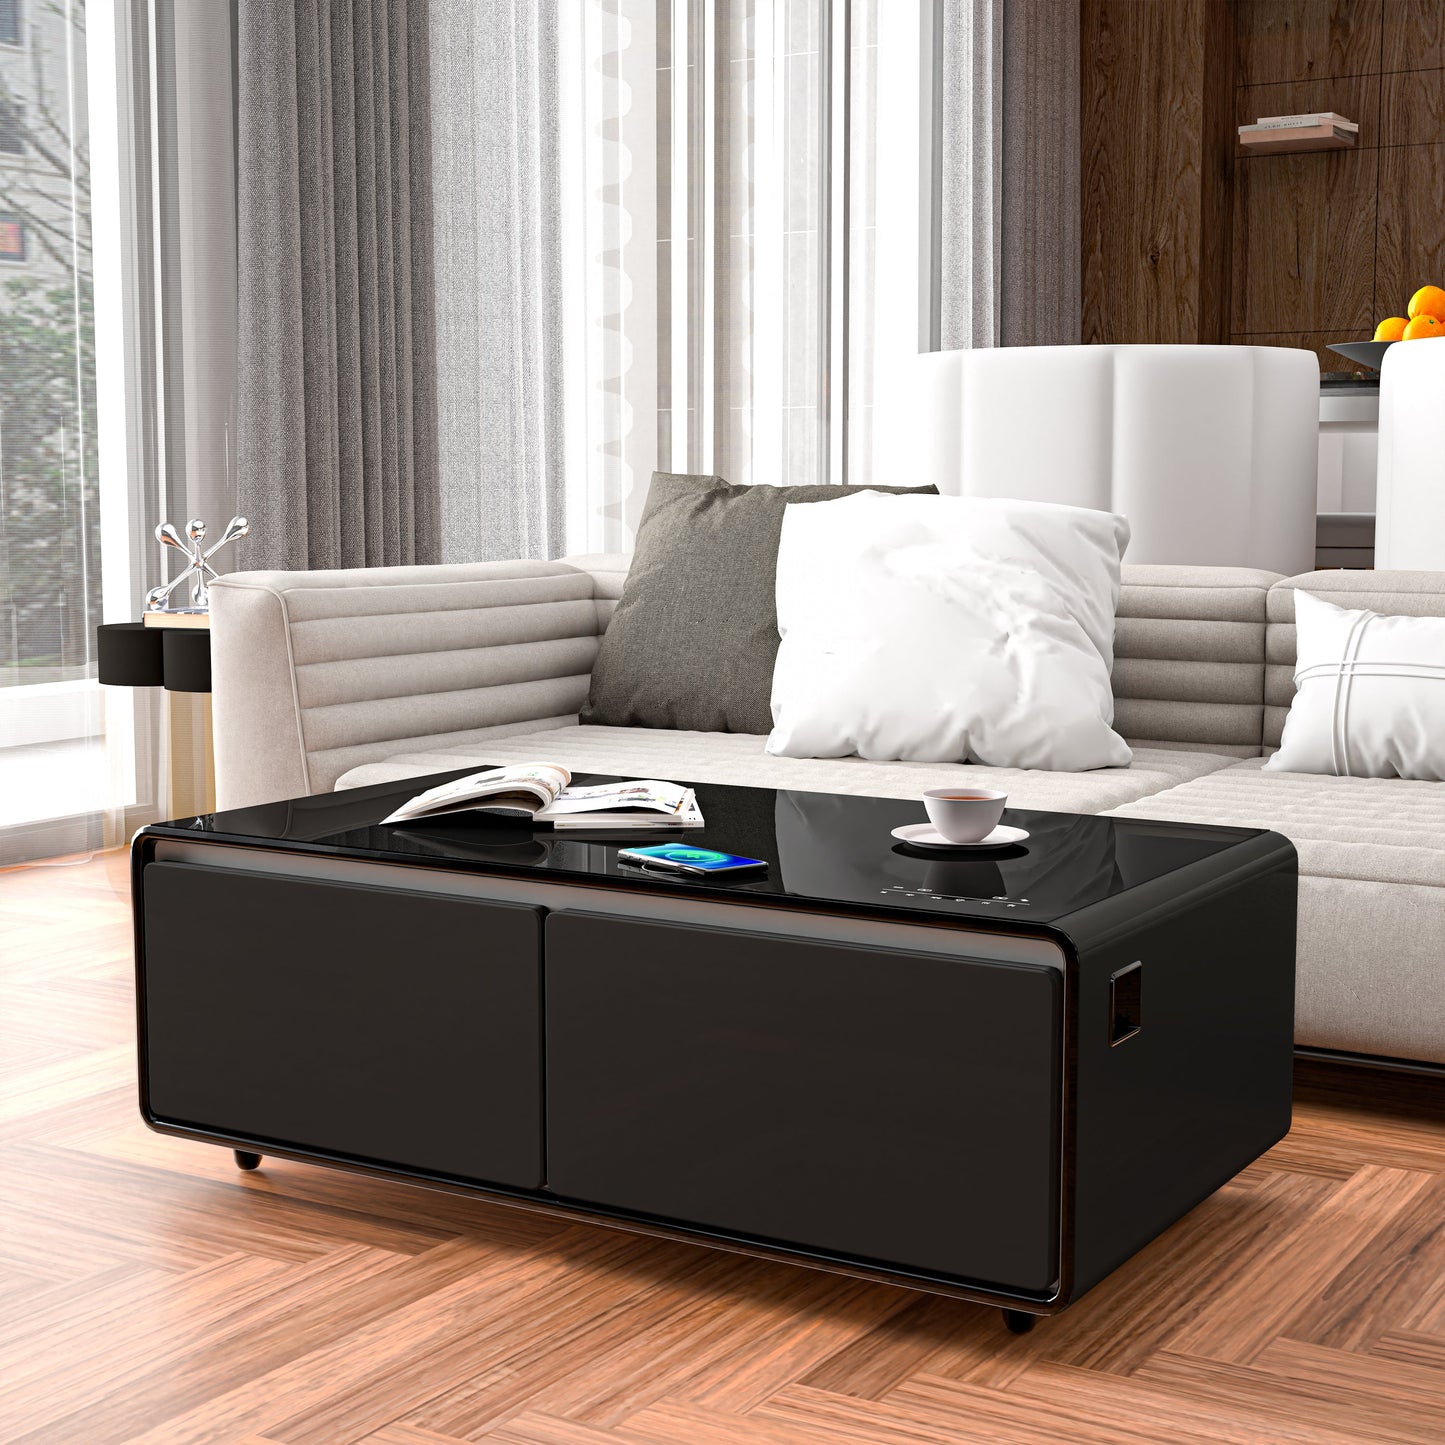 Modern Smart Coffee Table with Built-in Fridge, Bluetooth Speaker, Wireless Charging Module, Touch Control Panel, Power Socket, USB Interface, Outlet Protection, Atmosphere light, Black